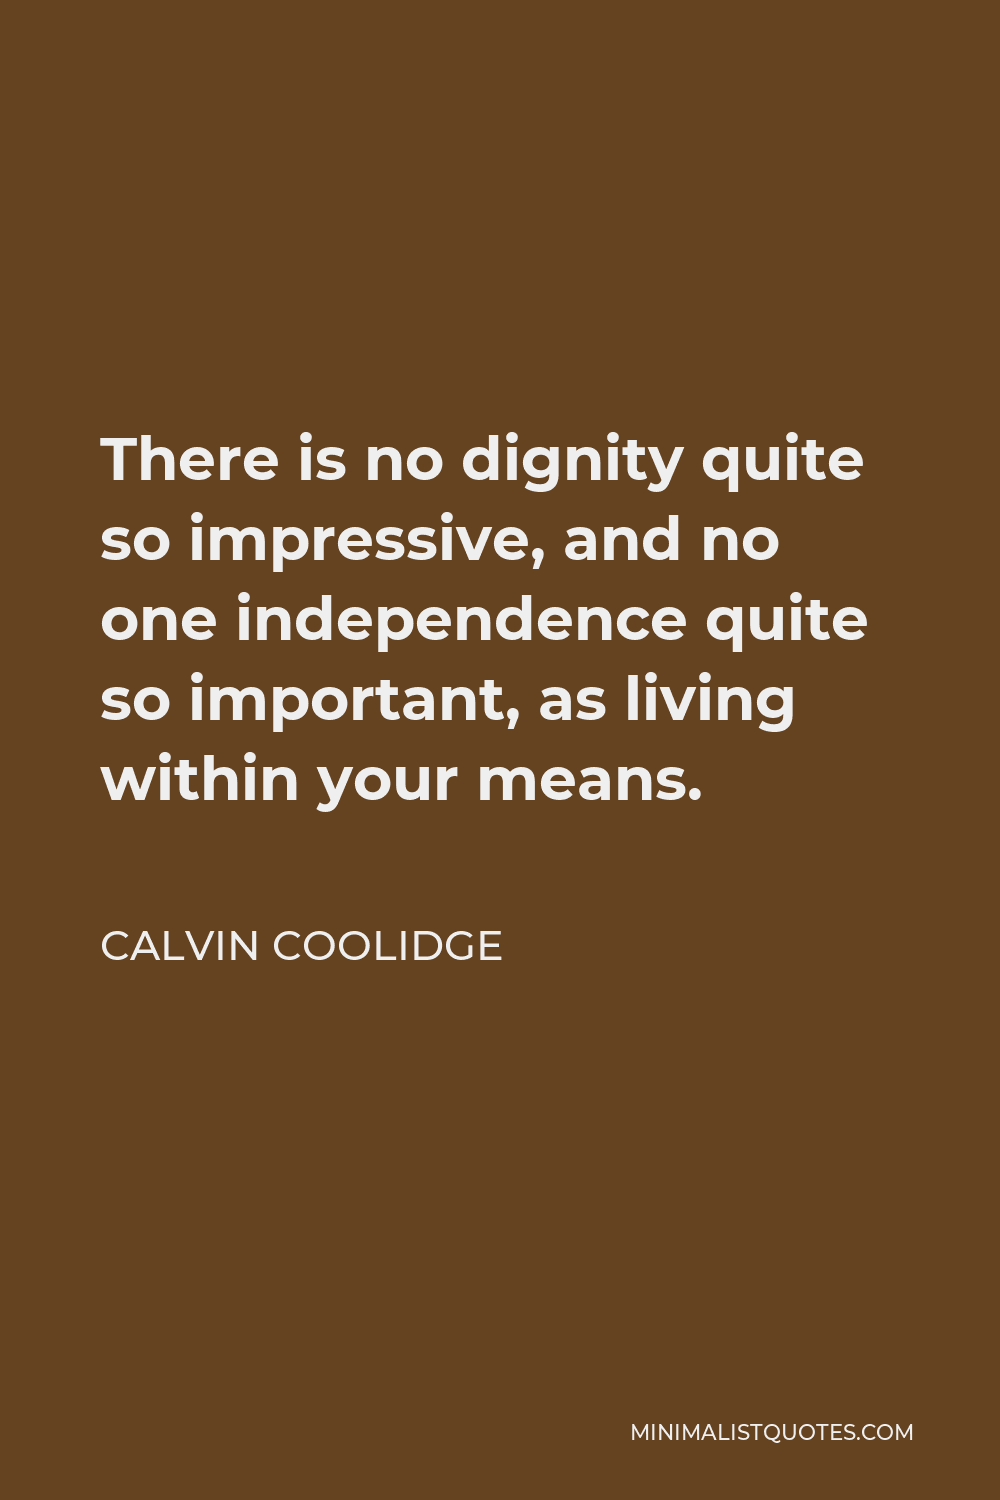 Calvin Coolidge Quote - There is no dignity quite so impressive, and no one independence quite so important, as living within your means.